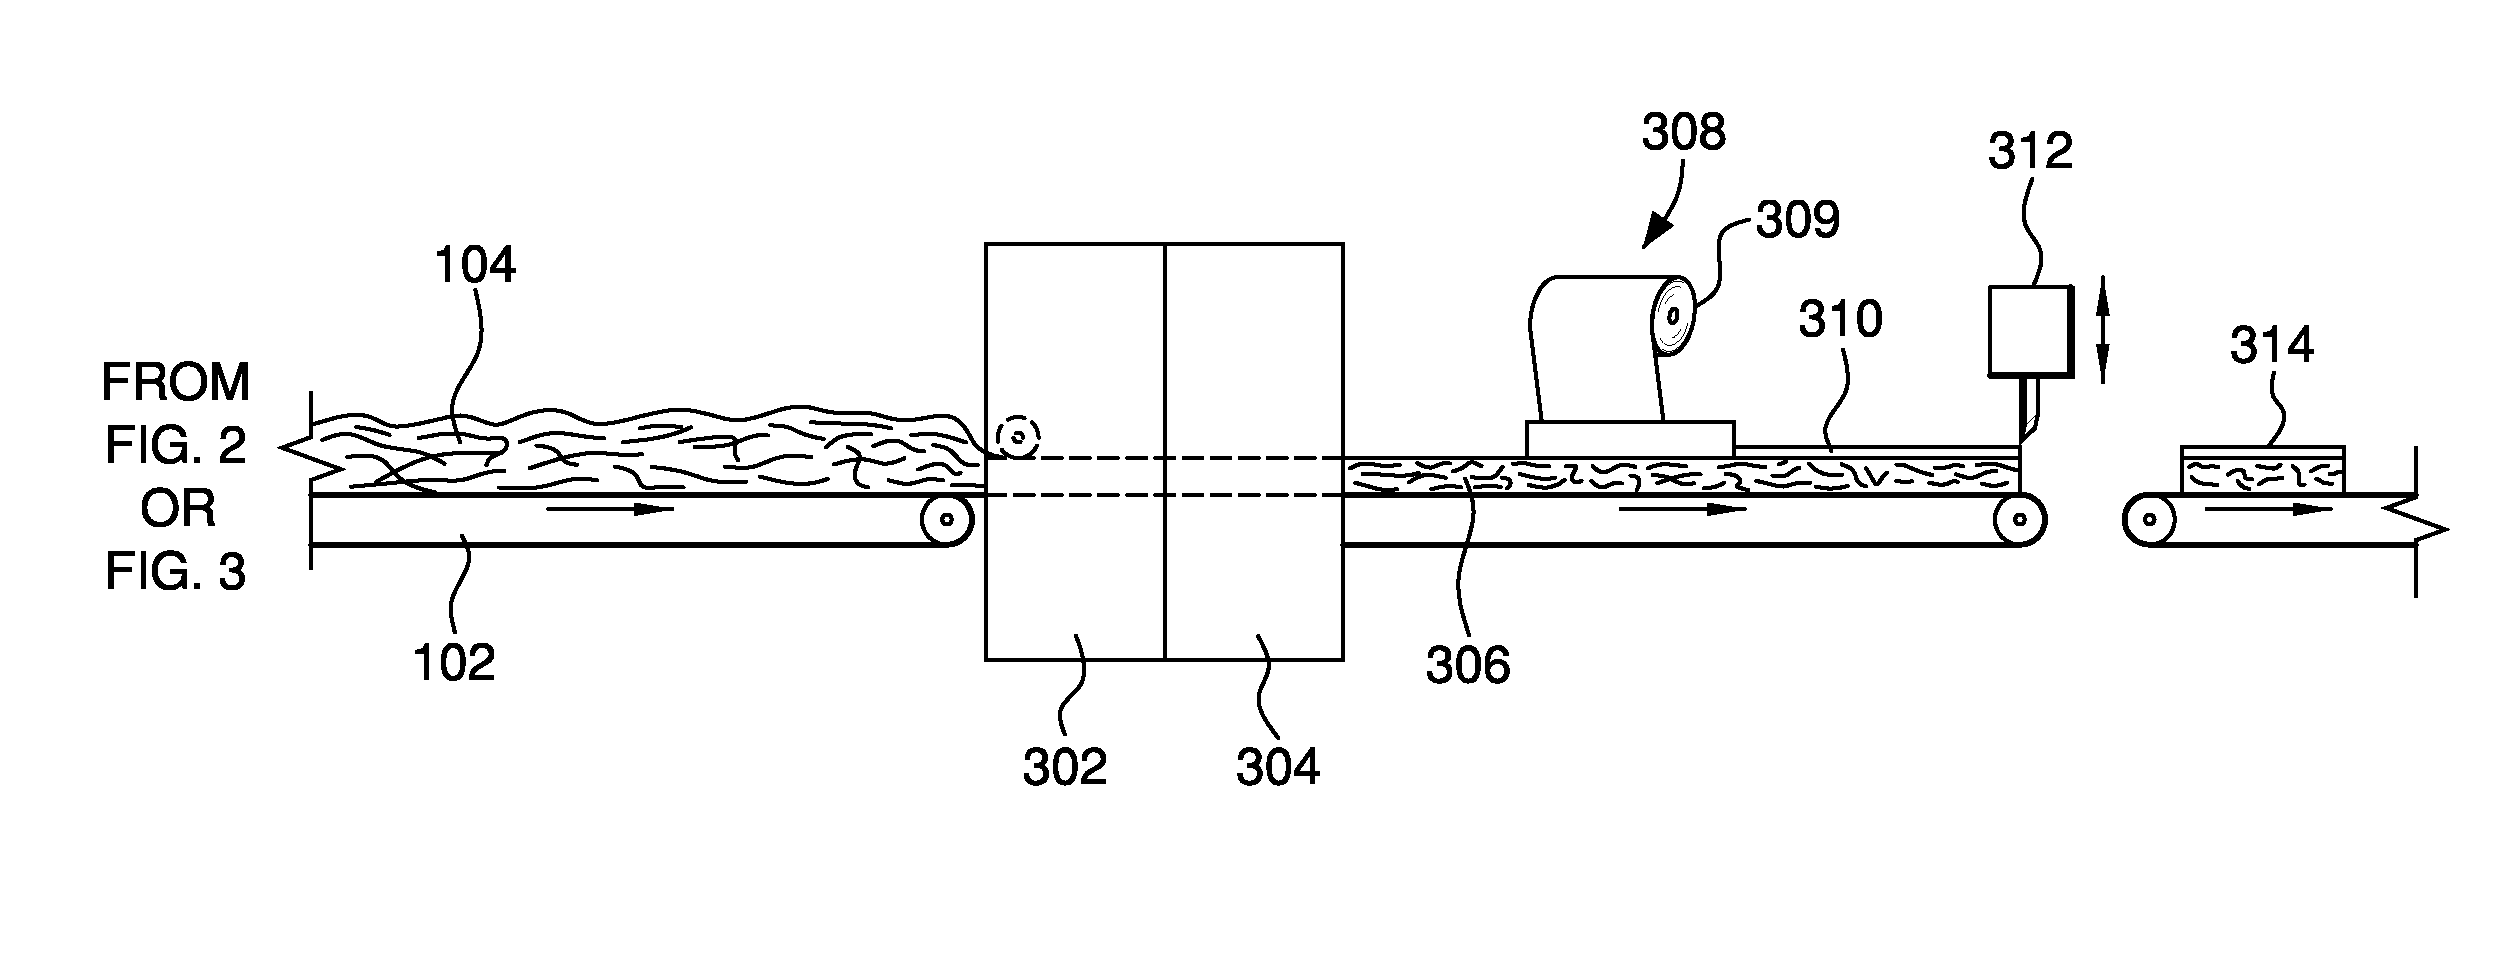 Mineral fiber insulation having thermoplastic polymer binder and method of making the same